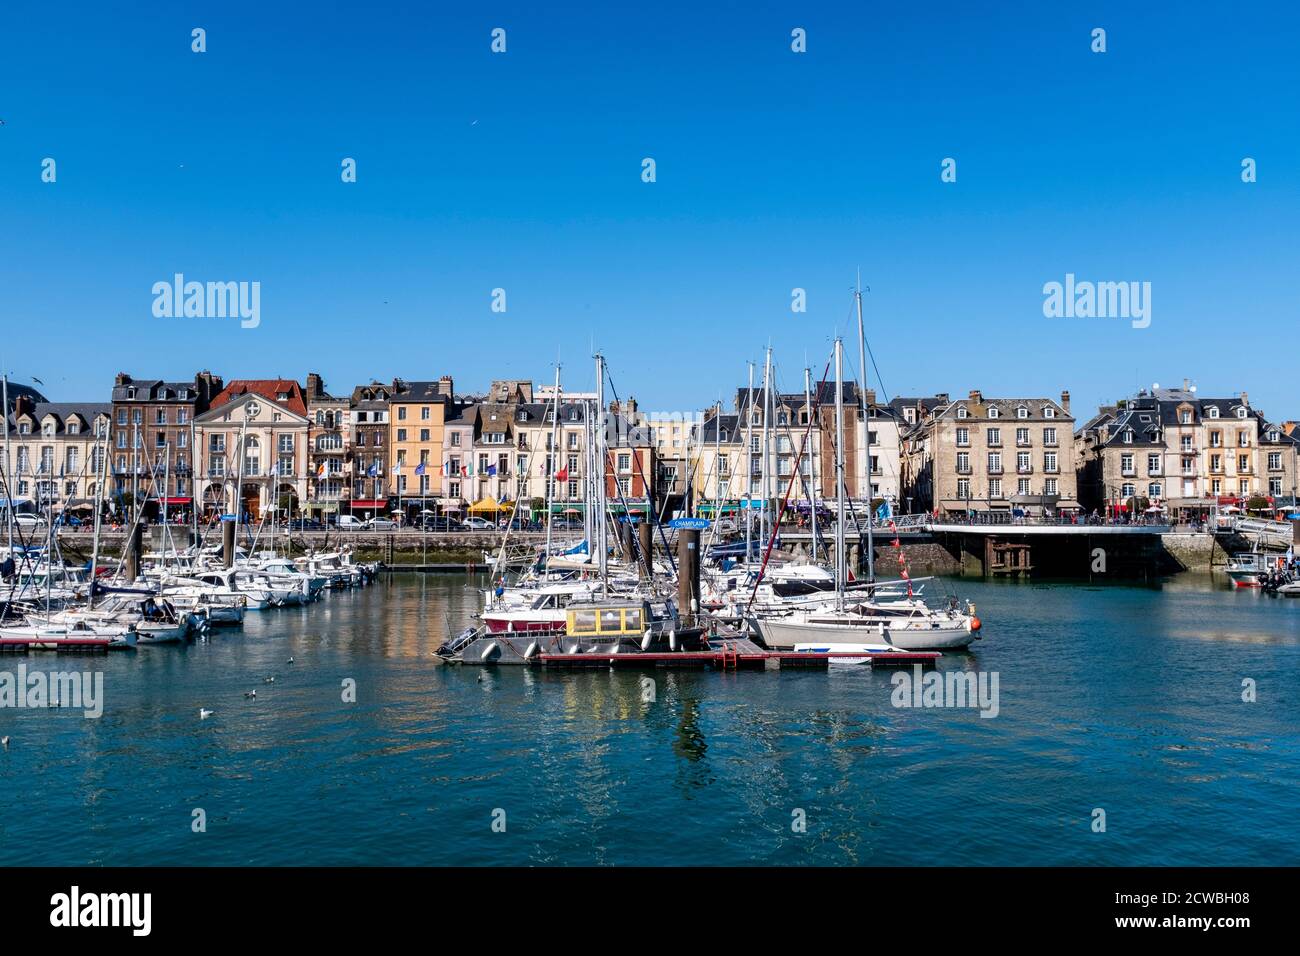 The Harbour At Dieppe, Normandy, France. Stock Photo